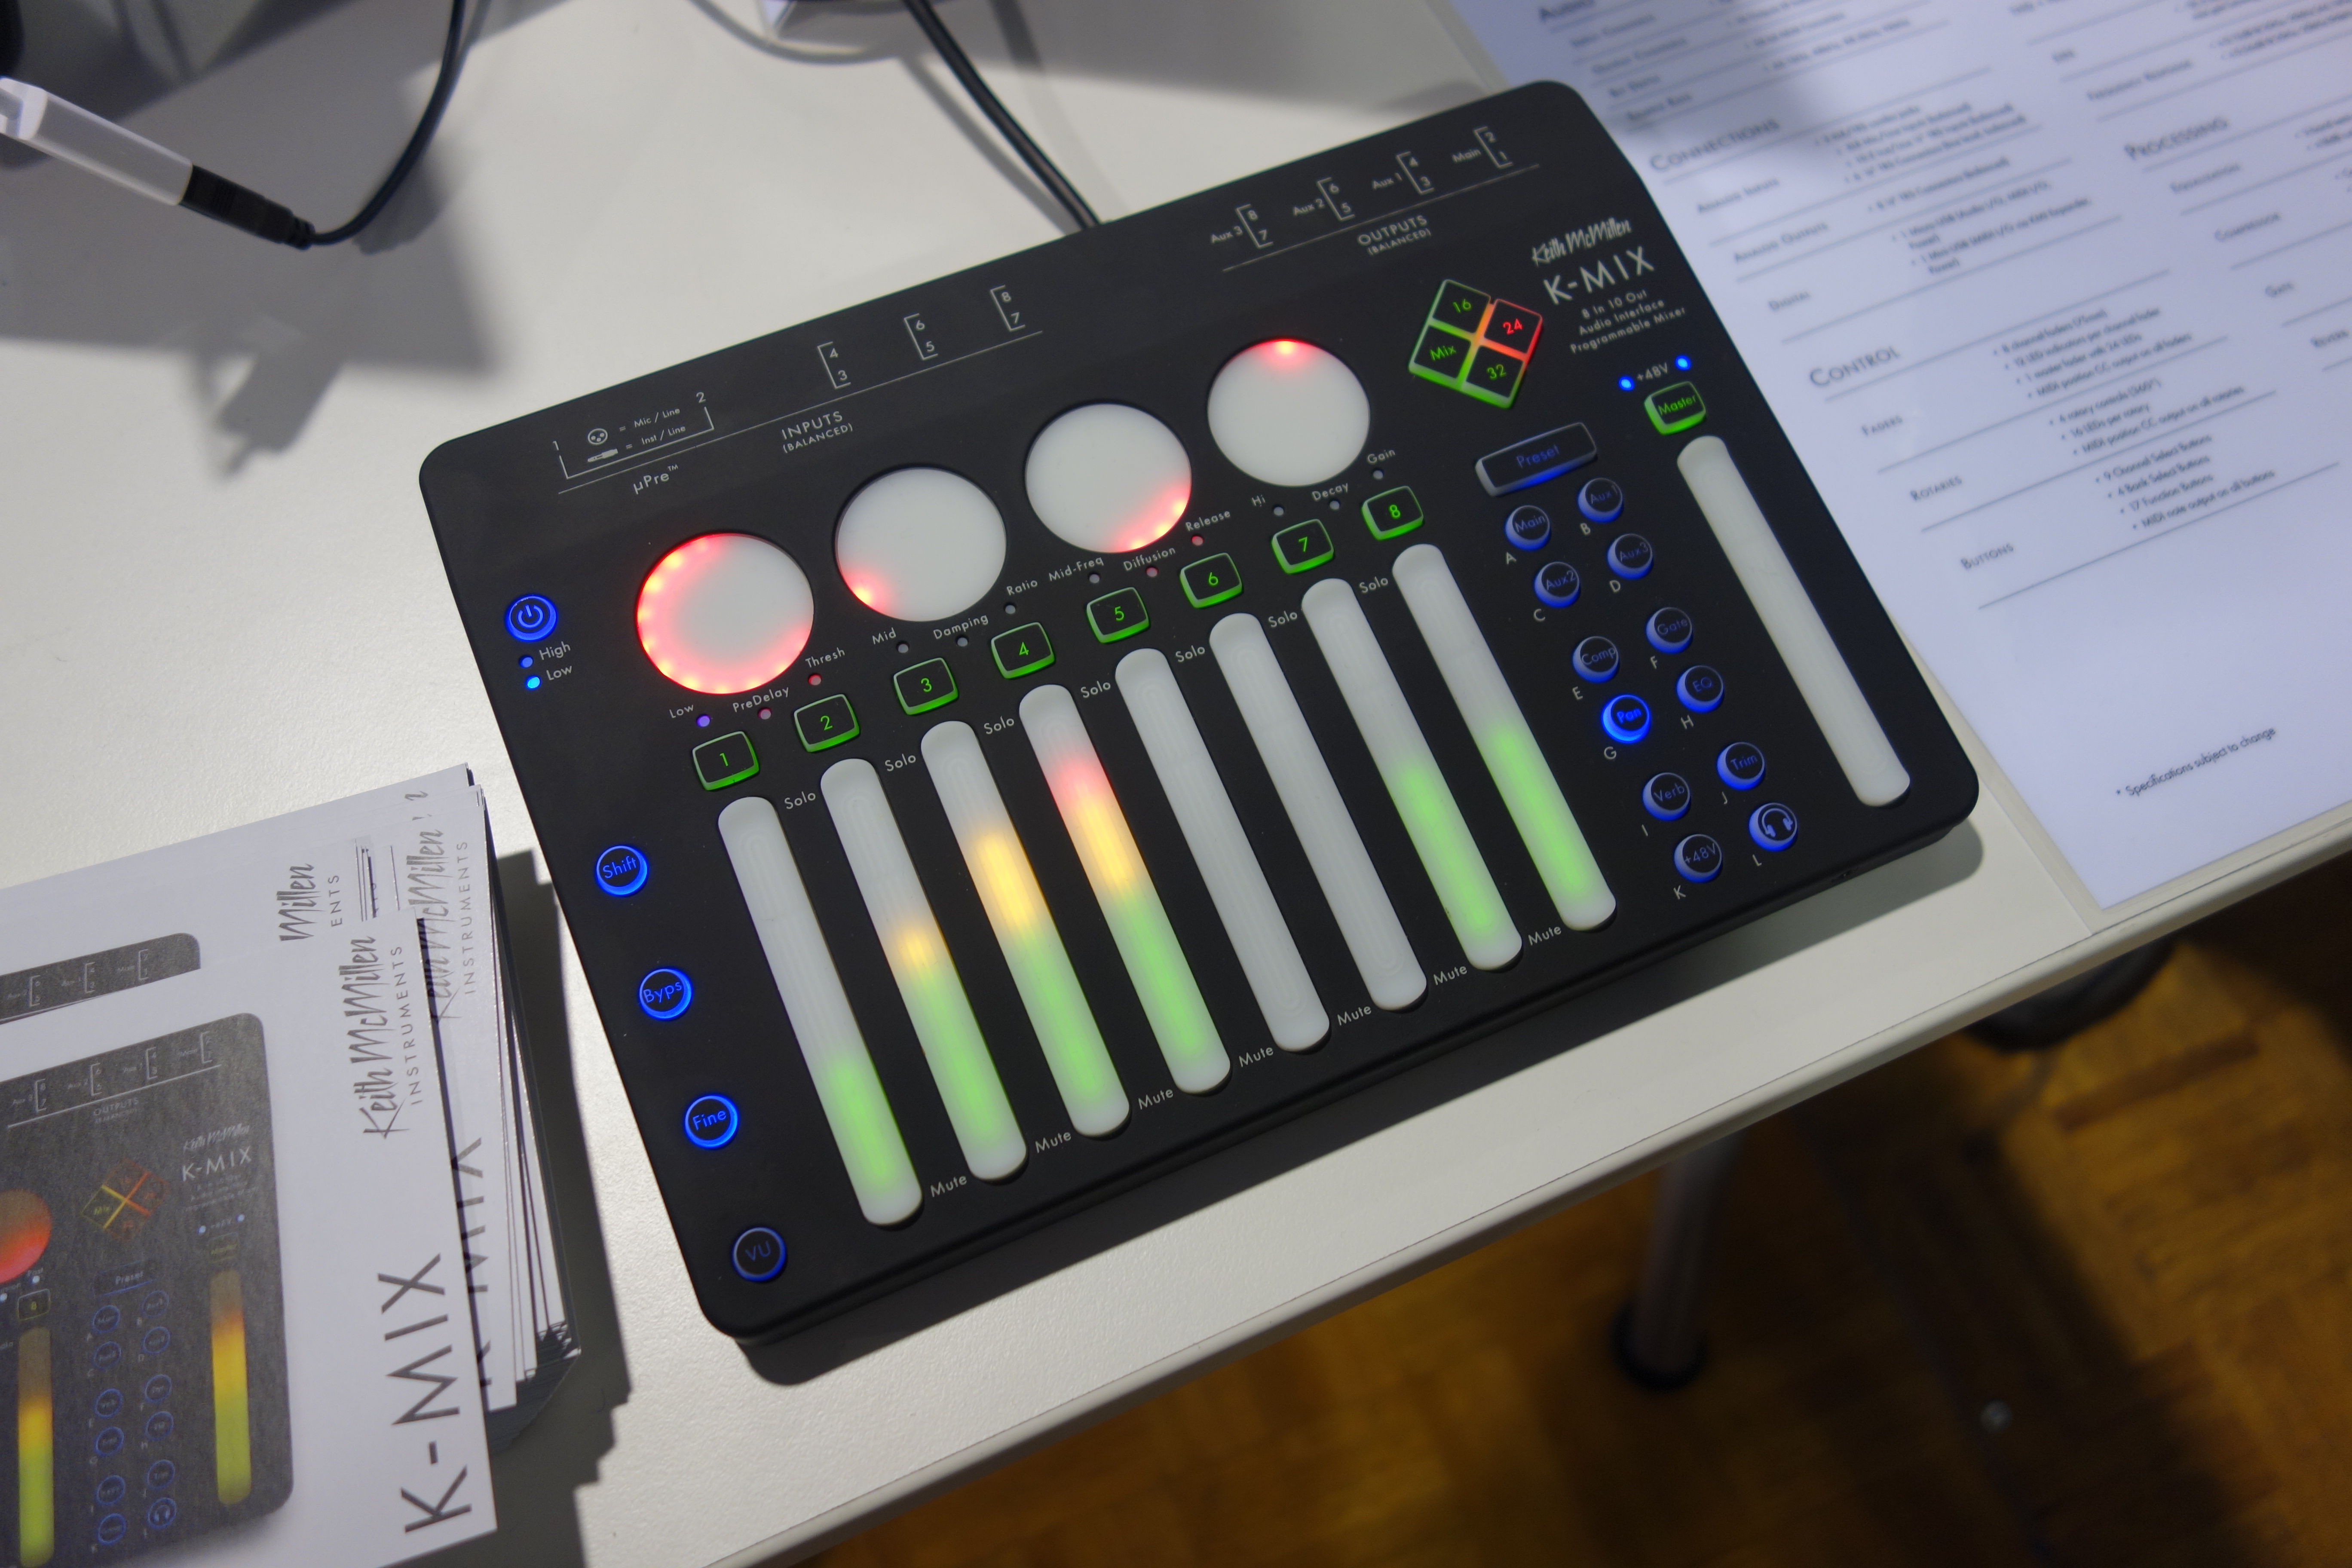 File:Keith K-MIX audio interface + programmable mixer control surface - 2015 NAMM - DSC00376.jpg - Wikimedia Commons